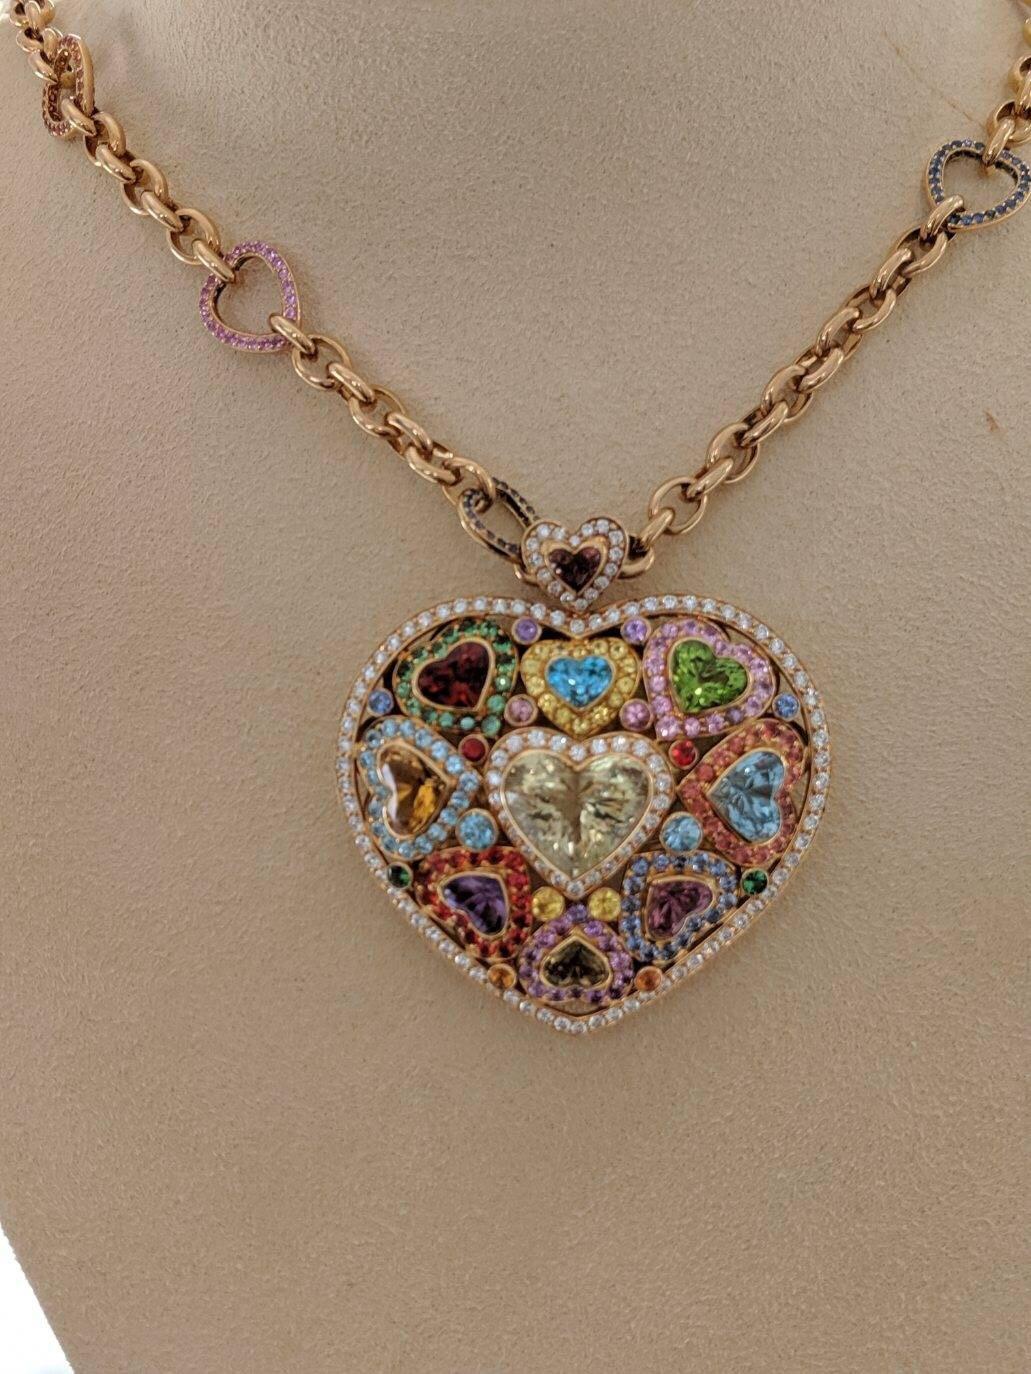 18 Karat Gold and Semiprecious Heart Necklace with 15.94 Multicolored Sapphires 1